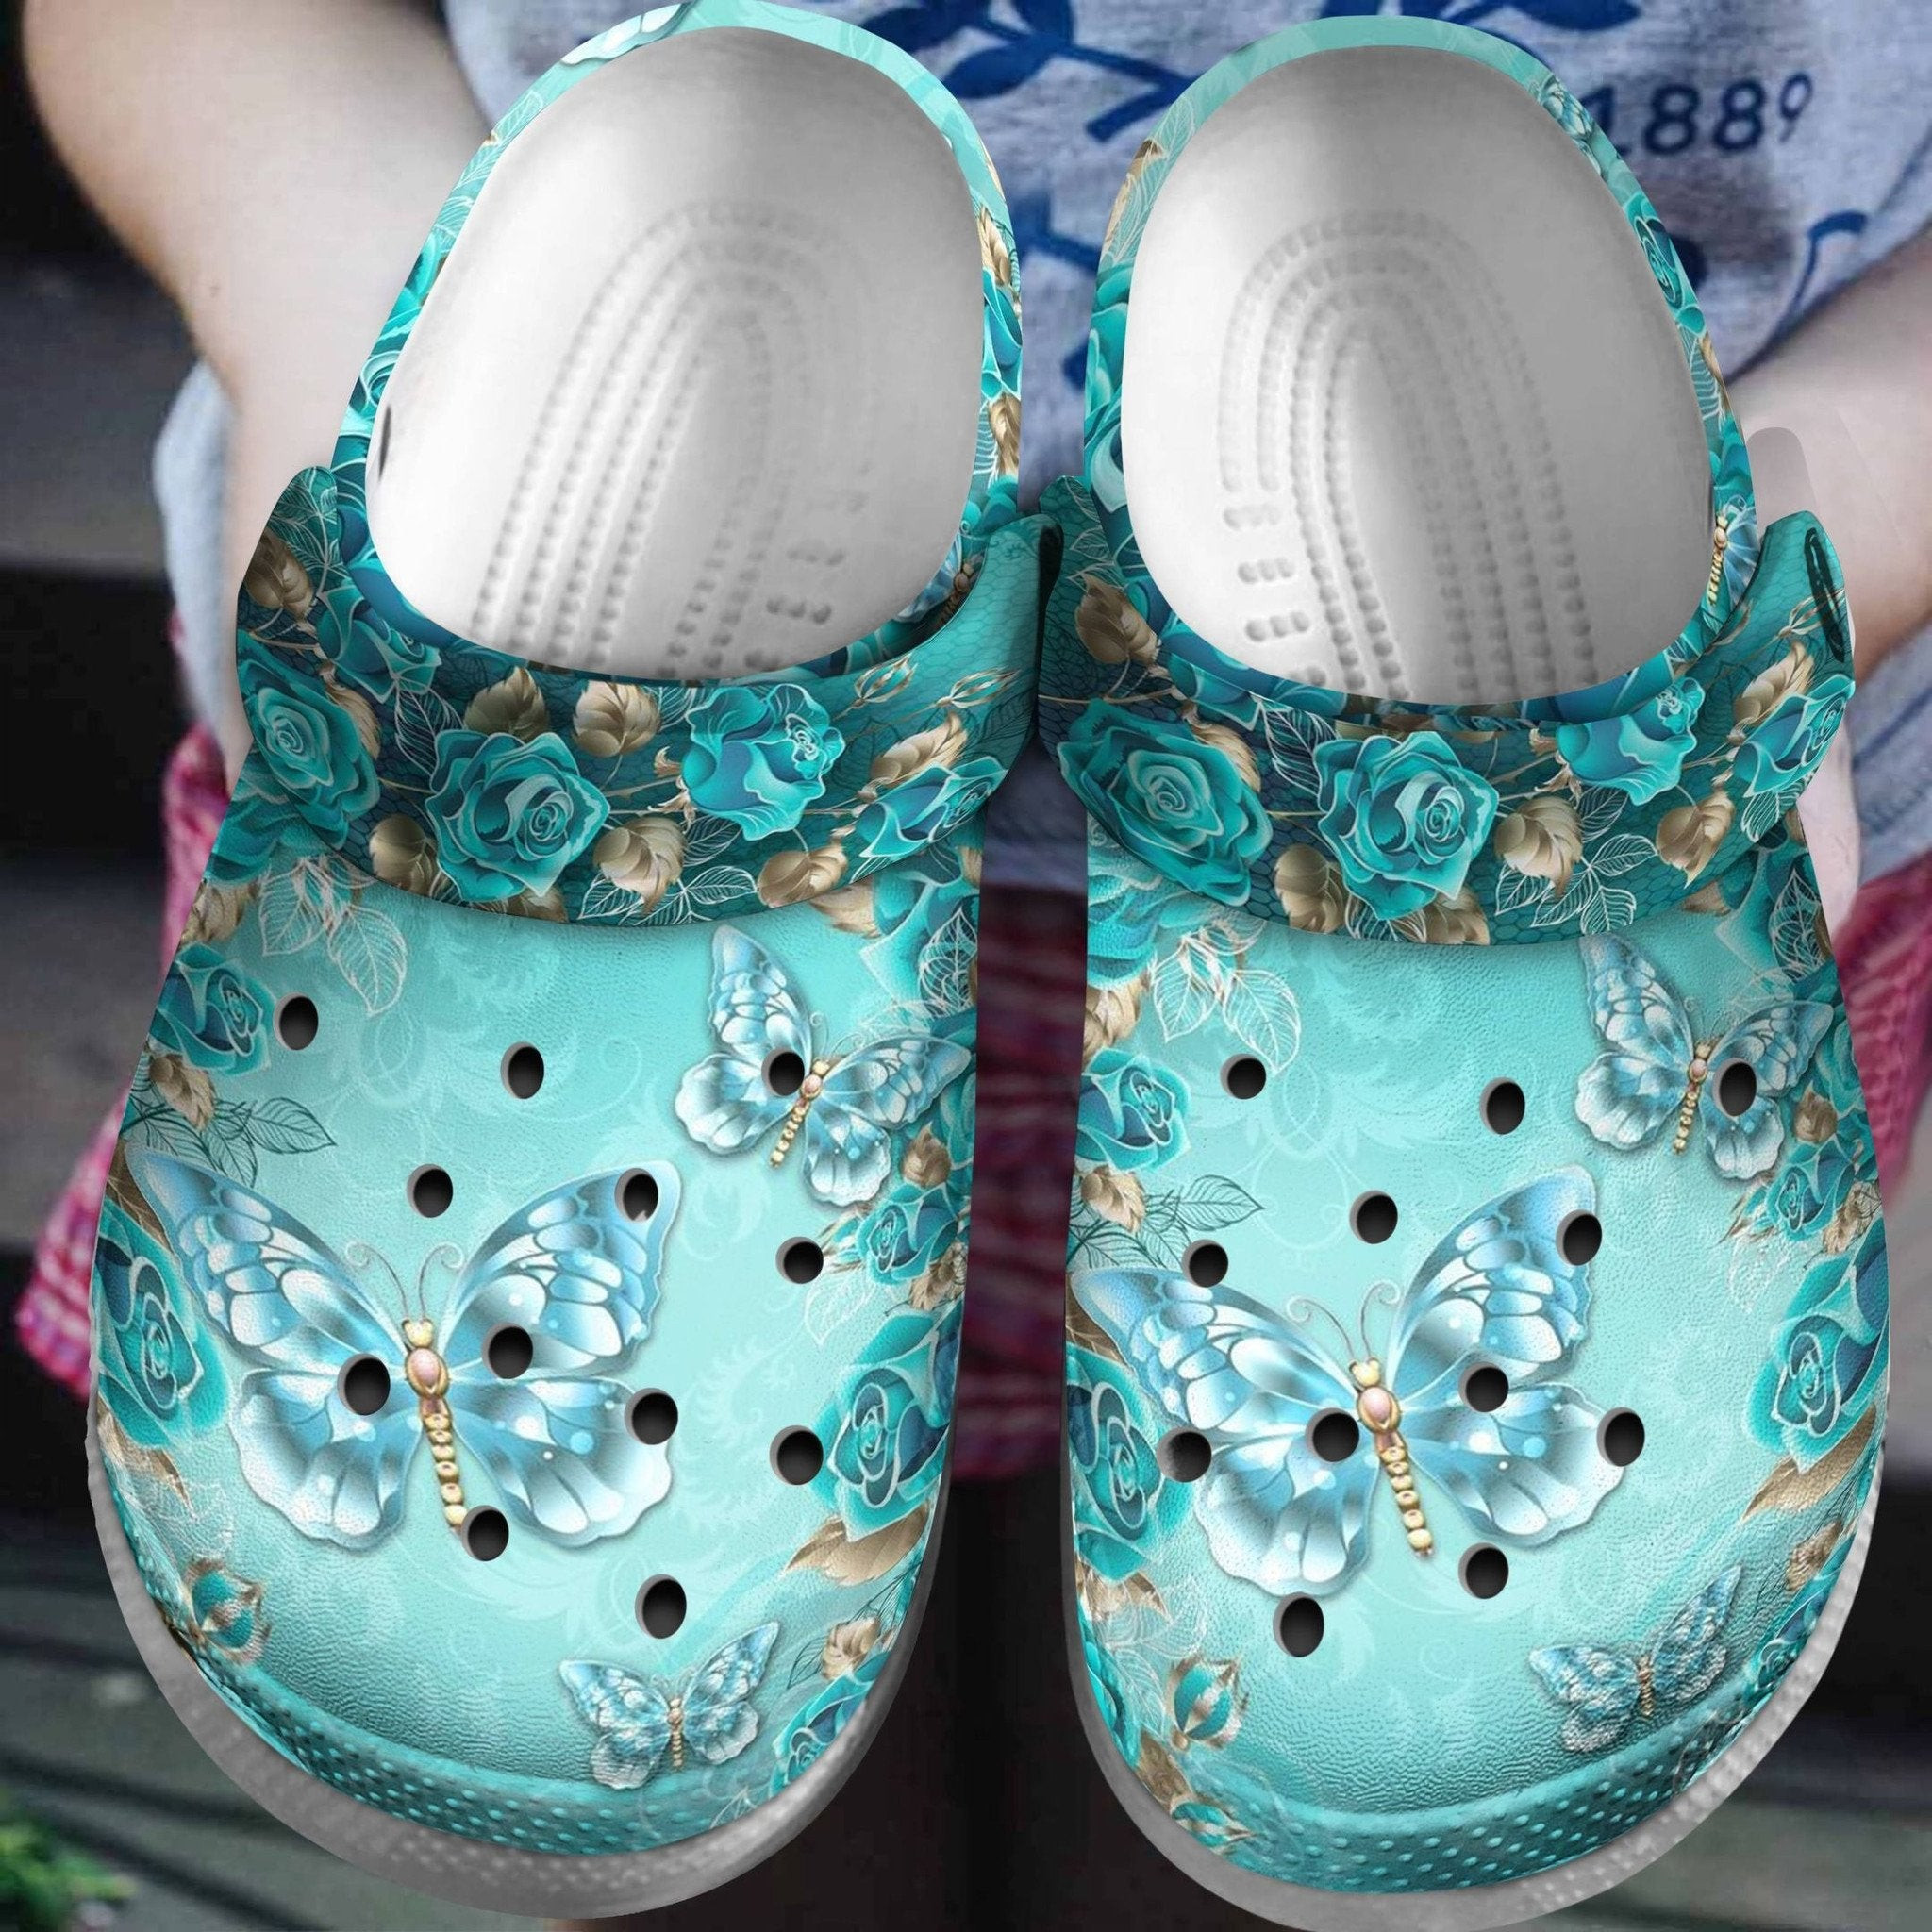 Butterfly Roses Stone Jade Green Crocss Shoes Clogs Gifts Daughter Mother Birthday For Men Women Kids